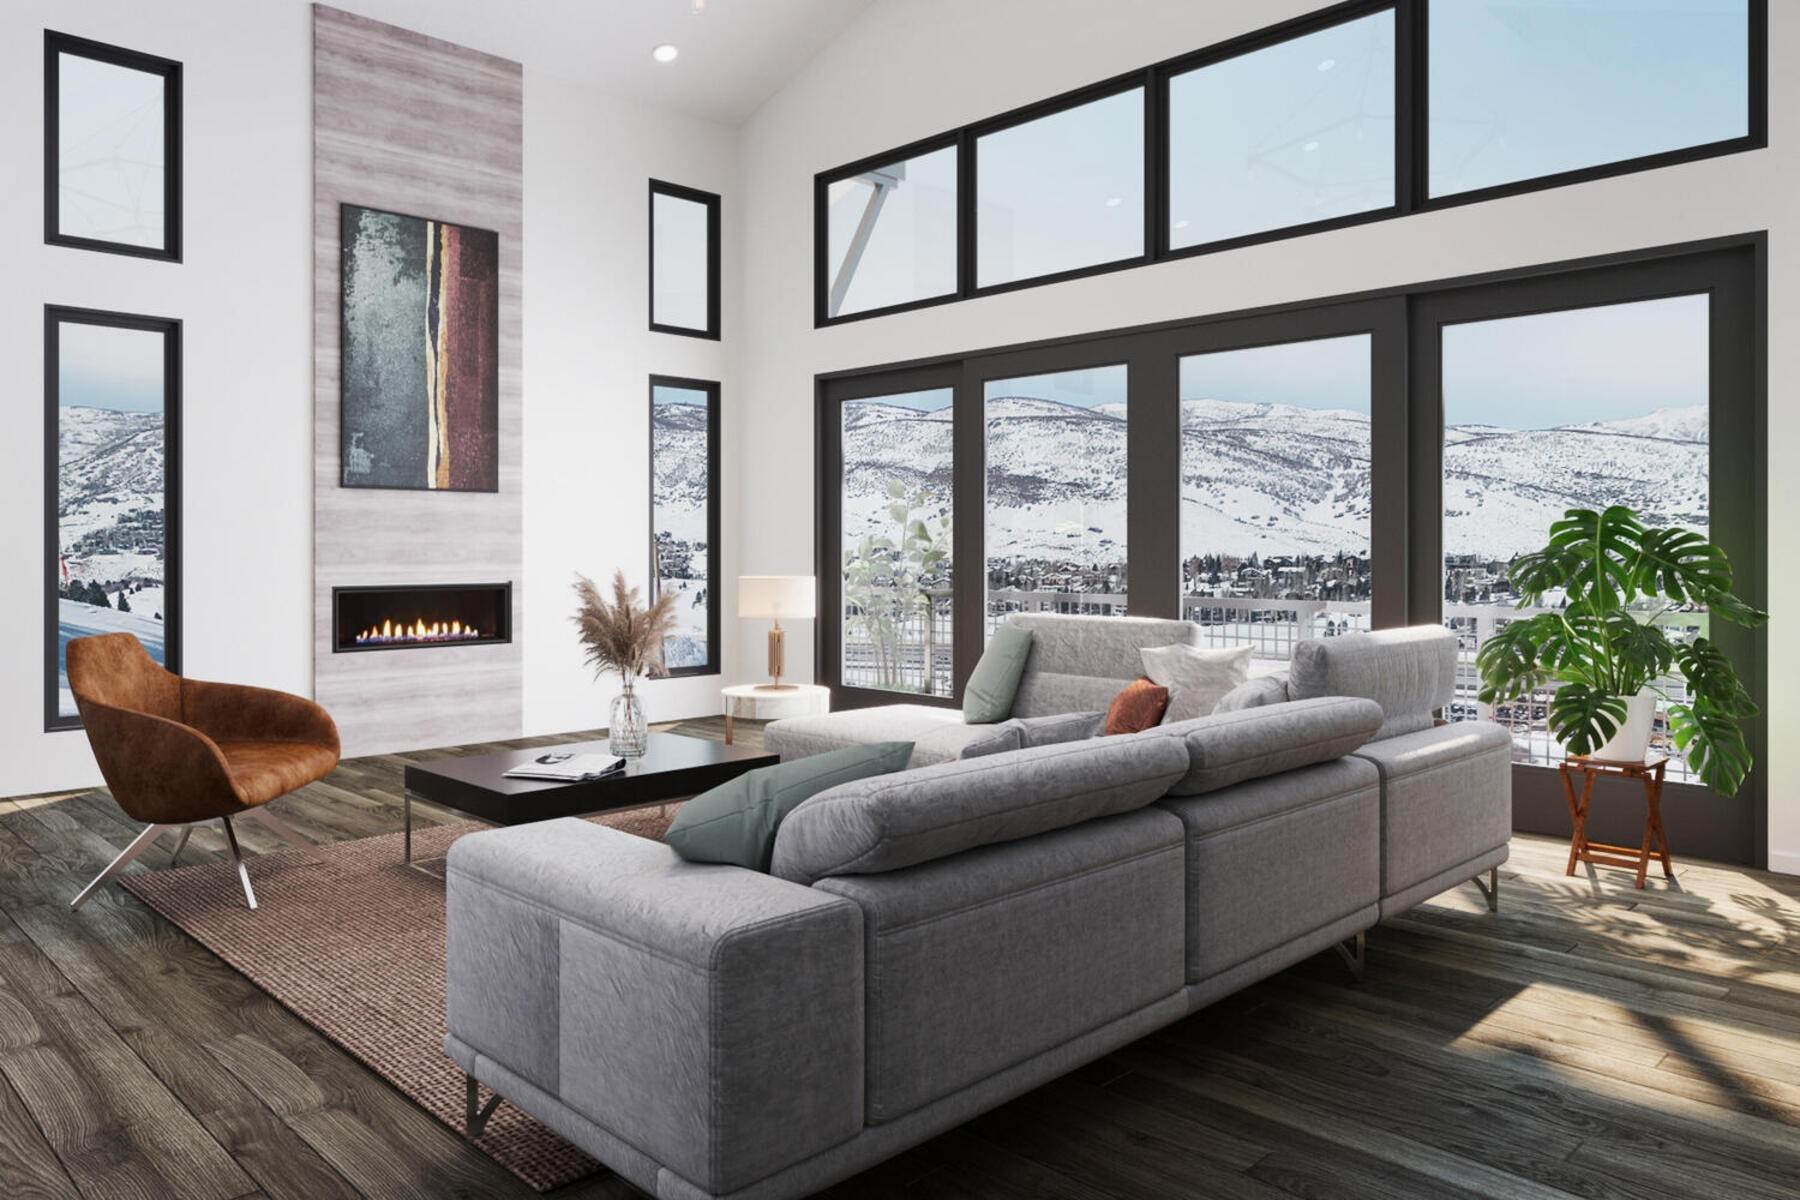 2. Single Family Homes for Sale at A Park City Residential Development Surrounded By 1,000 Acres Of Open Space 4068 W Sierra Drive, Lot 228 Park City, Utah 84098 United States